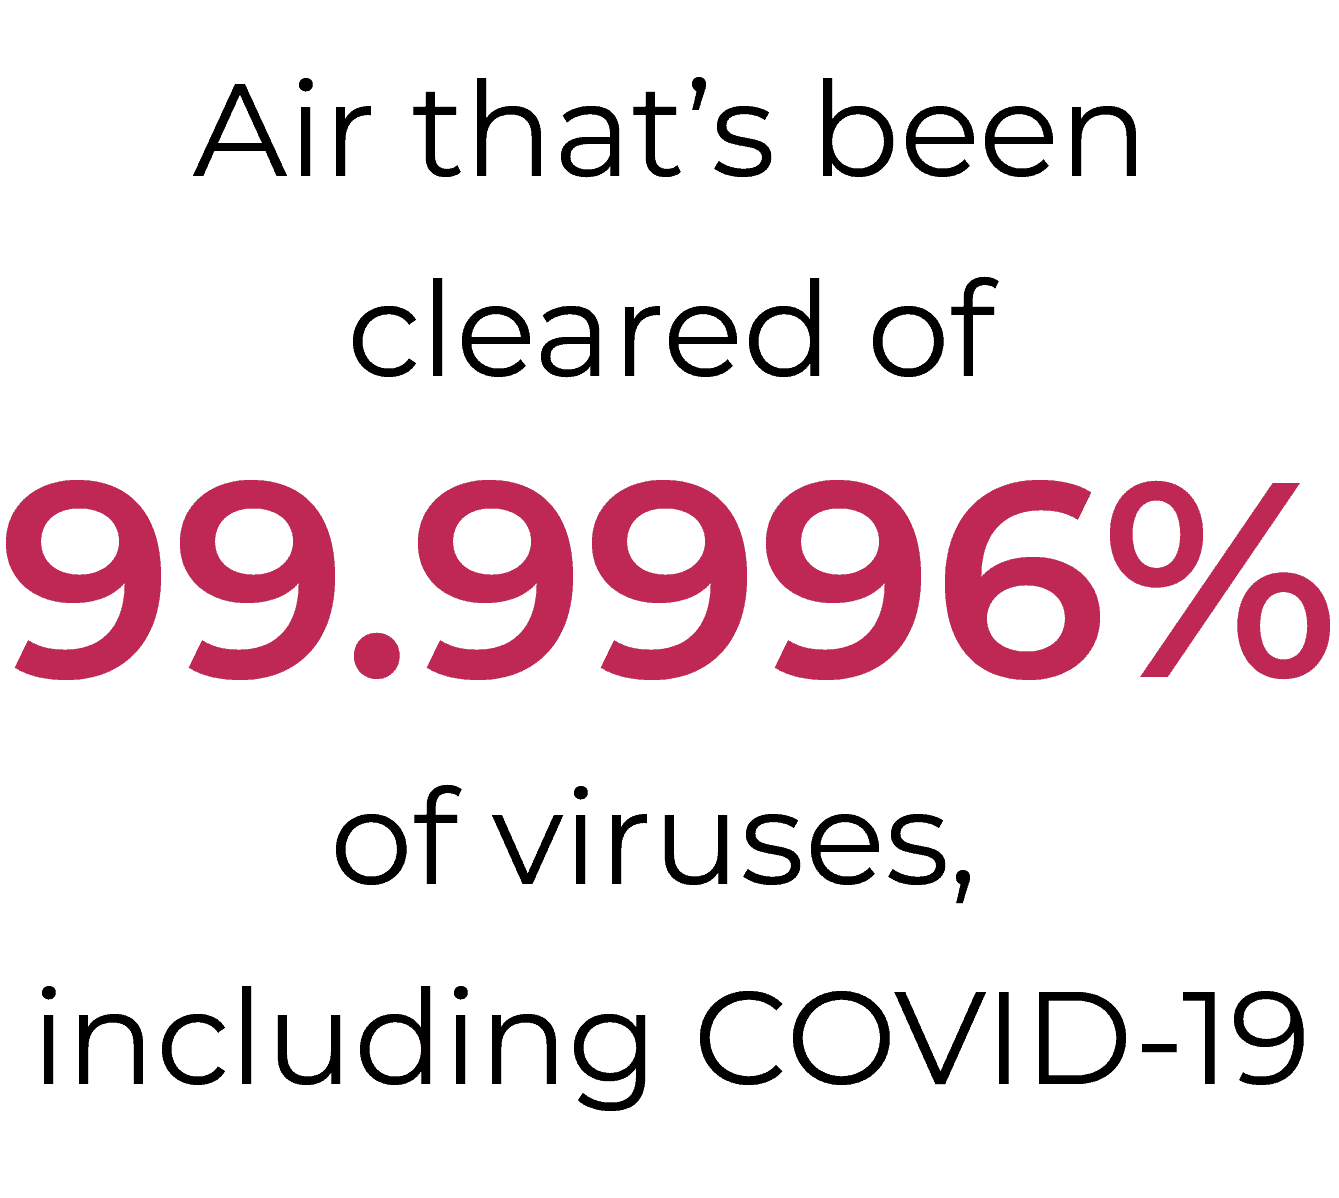 Air cleared of 99.9996% of viruses